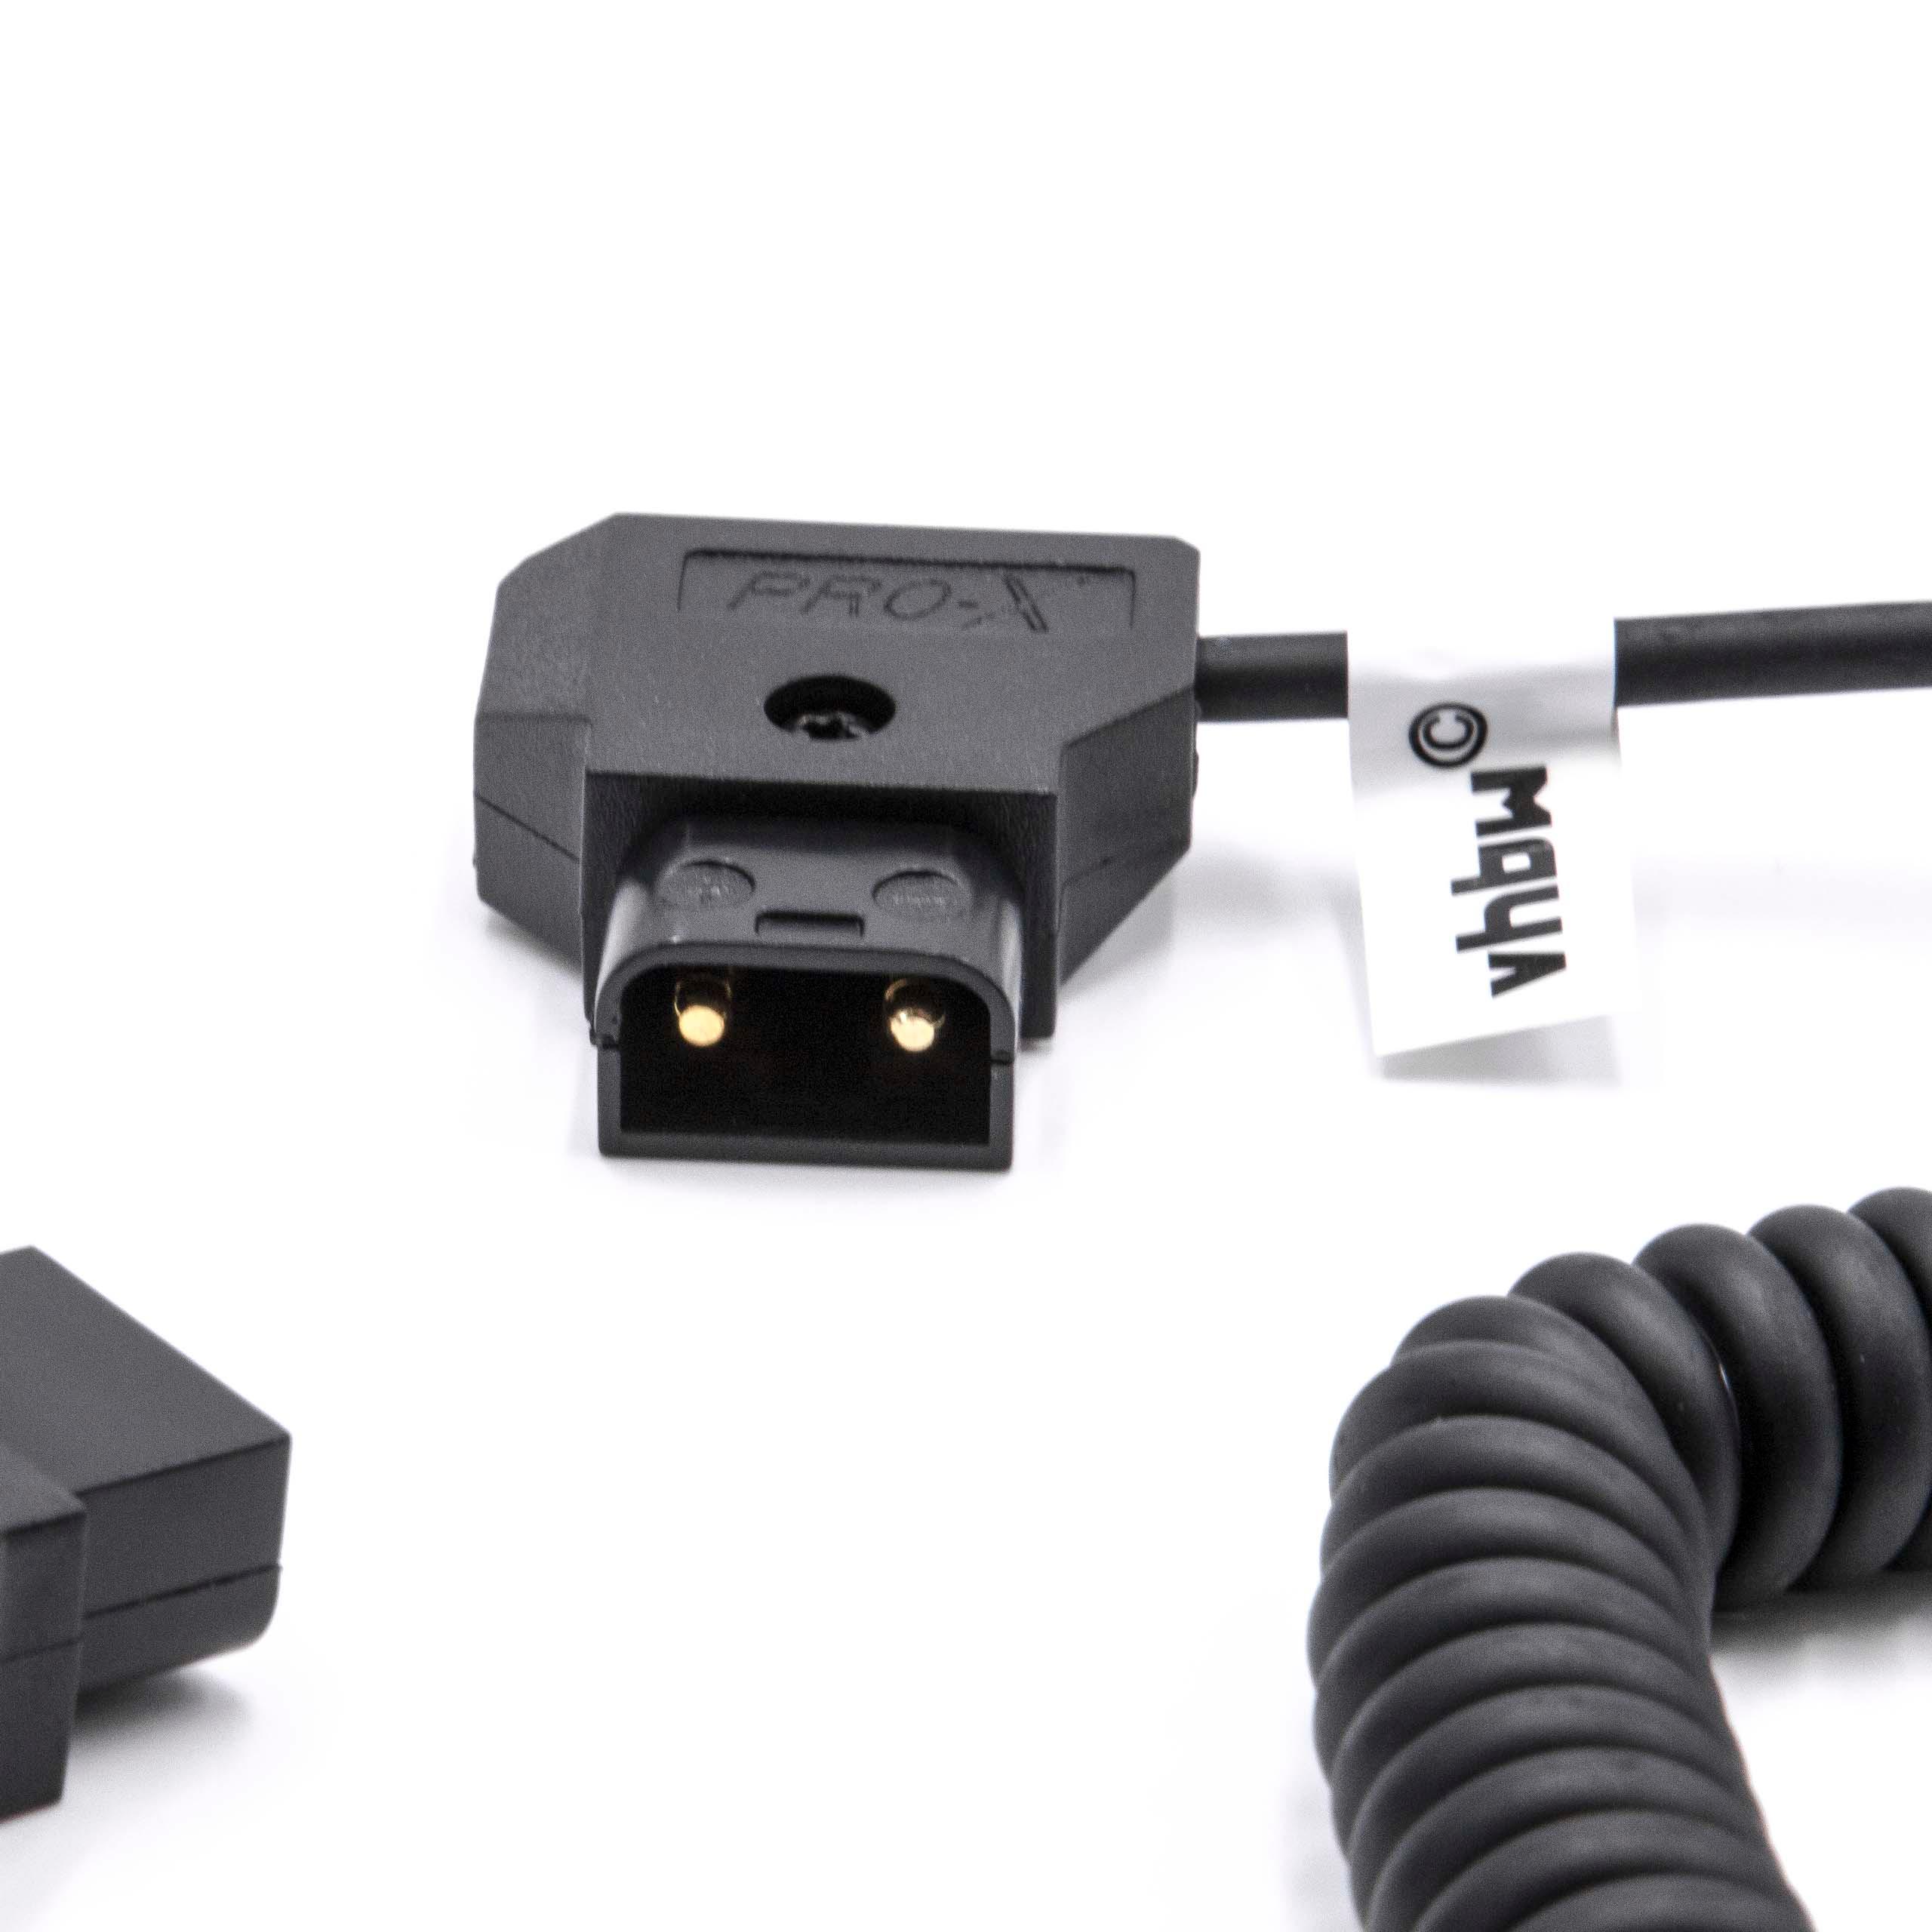 Adapter Cable D-Tap (male) to D-Tap (male) suitable for Anton Bauer D-Tap, Dionic Camera - Black